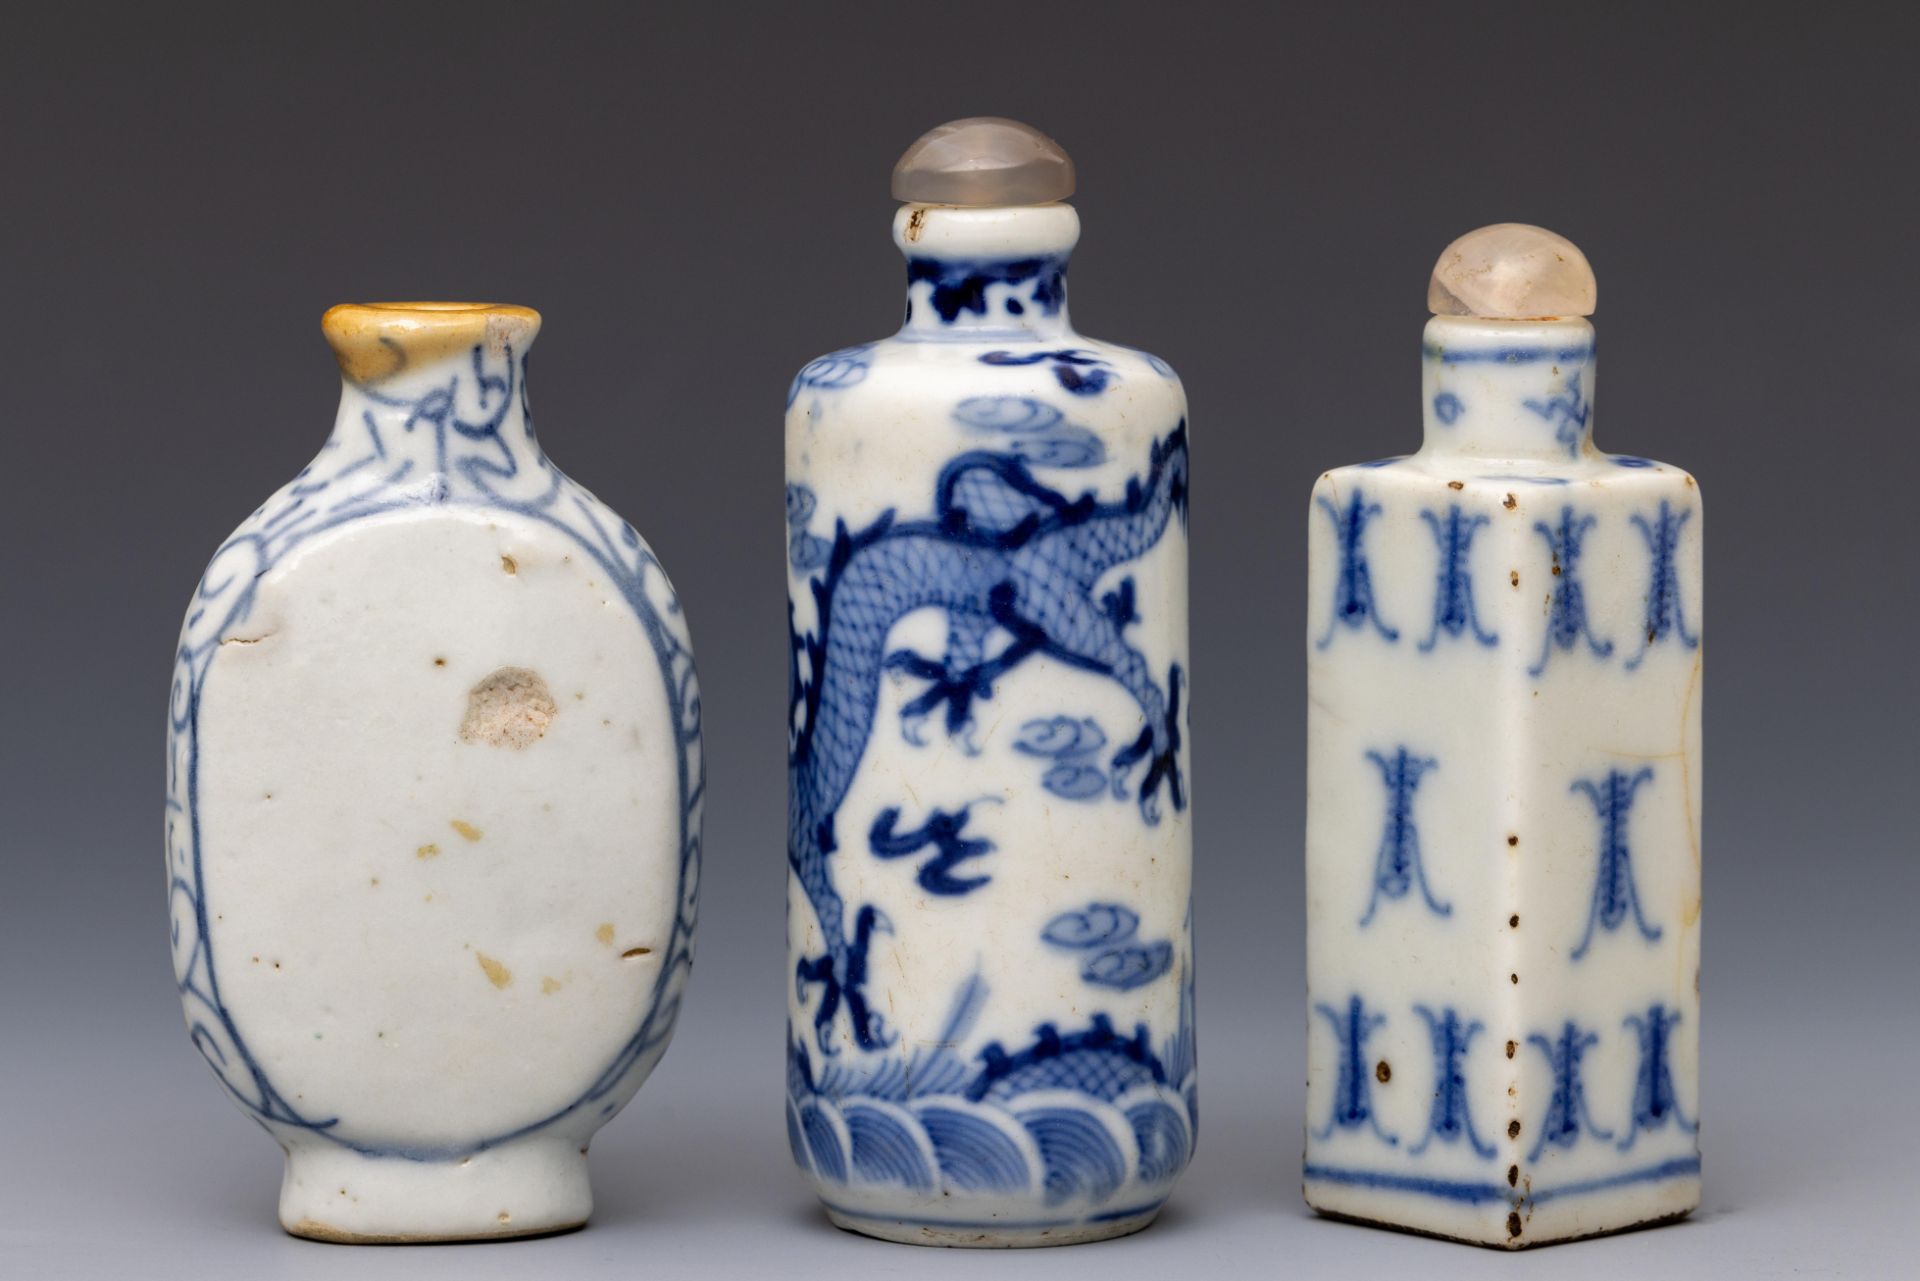 China, three blue and white porcelain snuff bottles and two stoppers, 20th century,